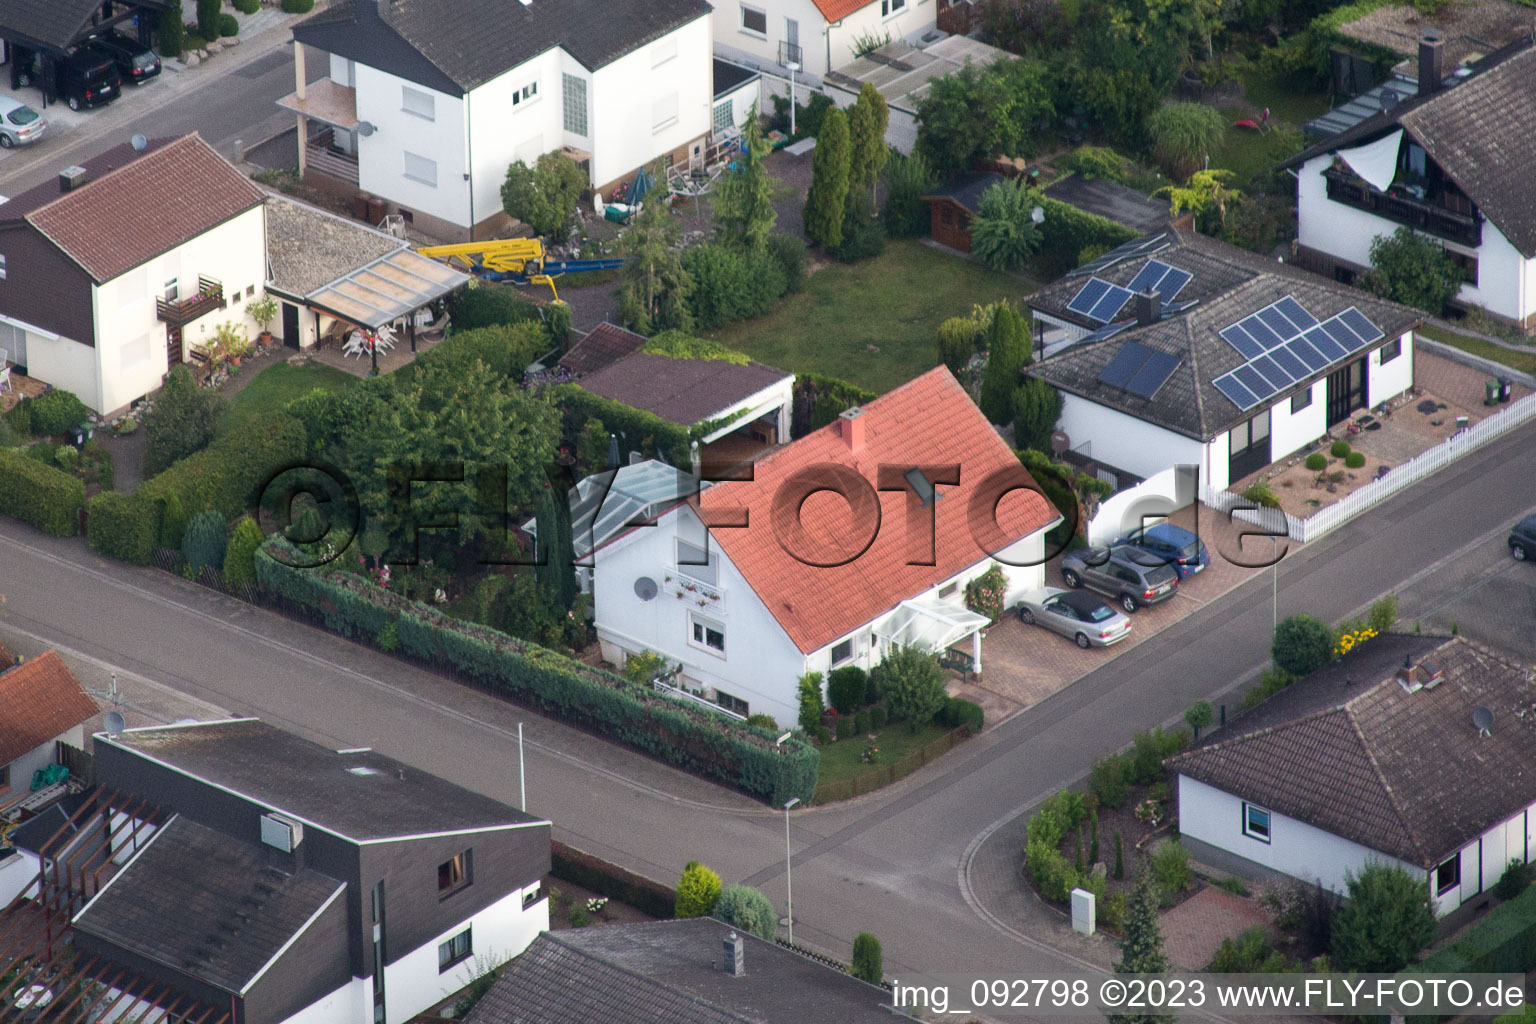 Bird's eye view of Maxburgstr in the district Billigheim in Billigheim-Ingenheim in the state Rhineland-Palatinate, Germany